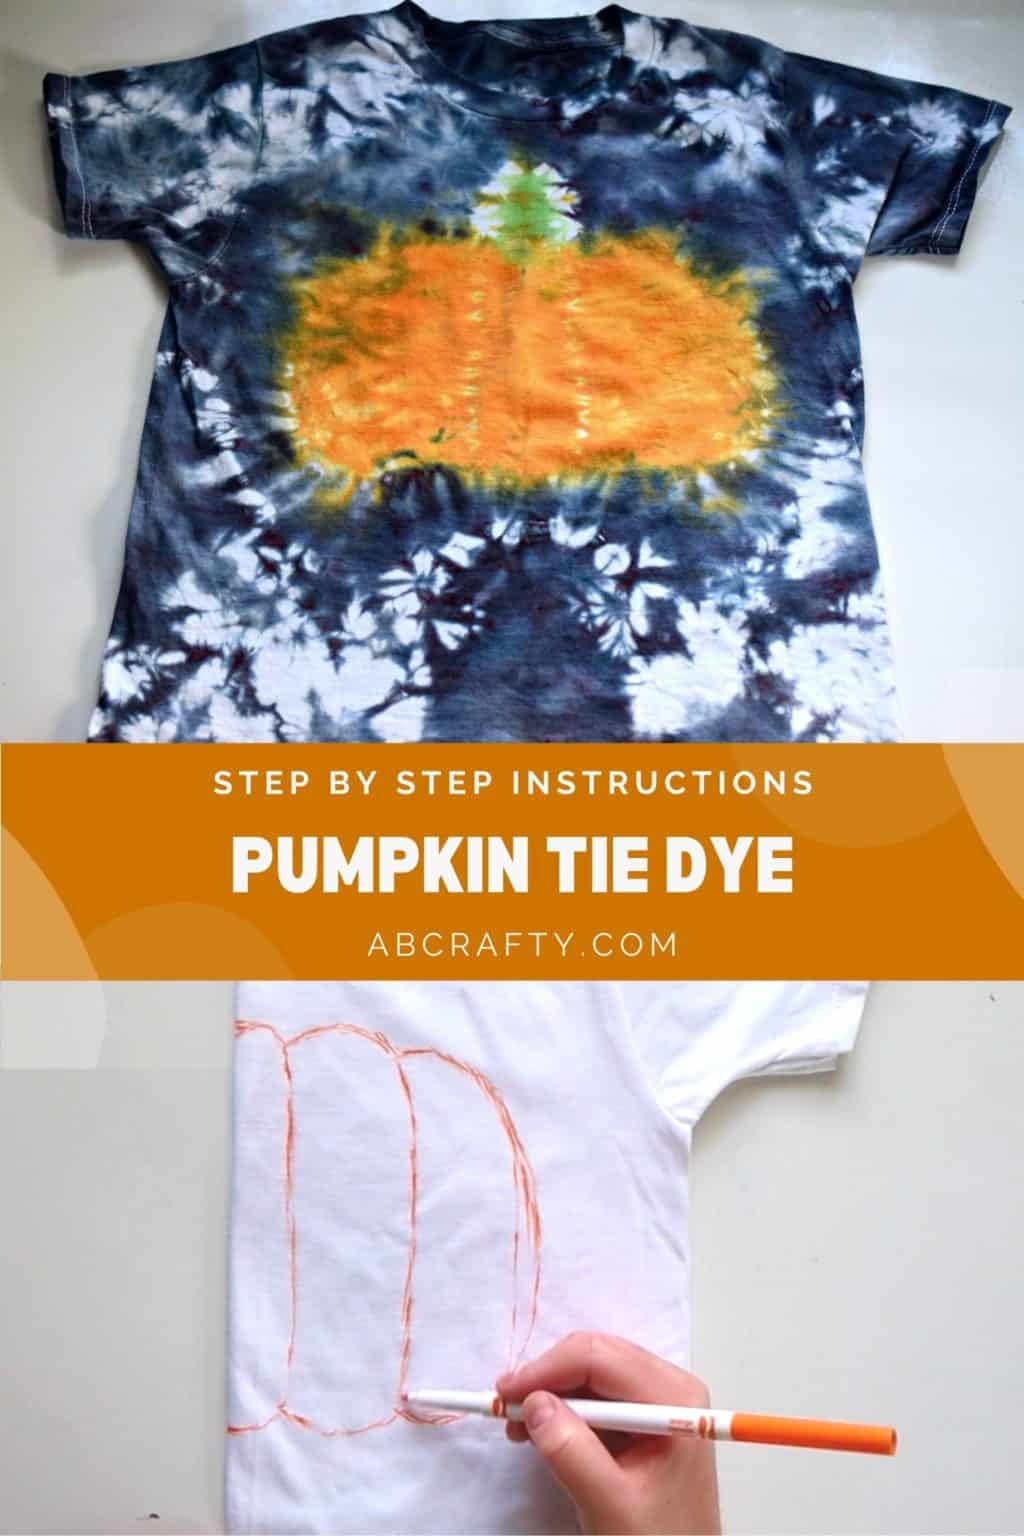 top photo of a tie dye pumpkin shirt and the bottom photo is drawing half a pumpkin onto a folded shirt with the title "pumpkin tie dye"